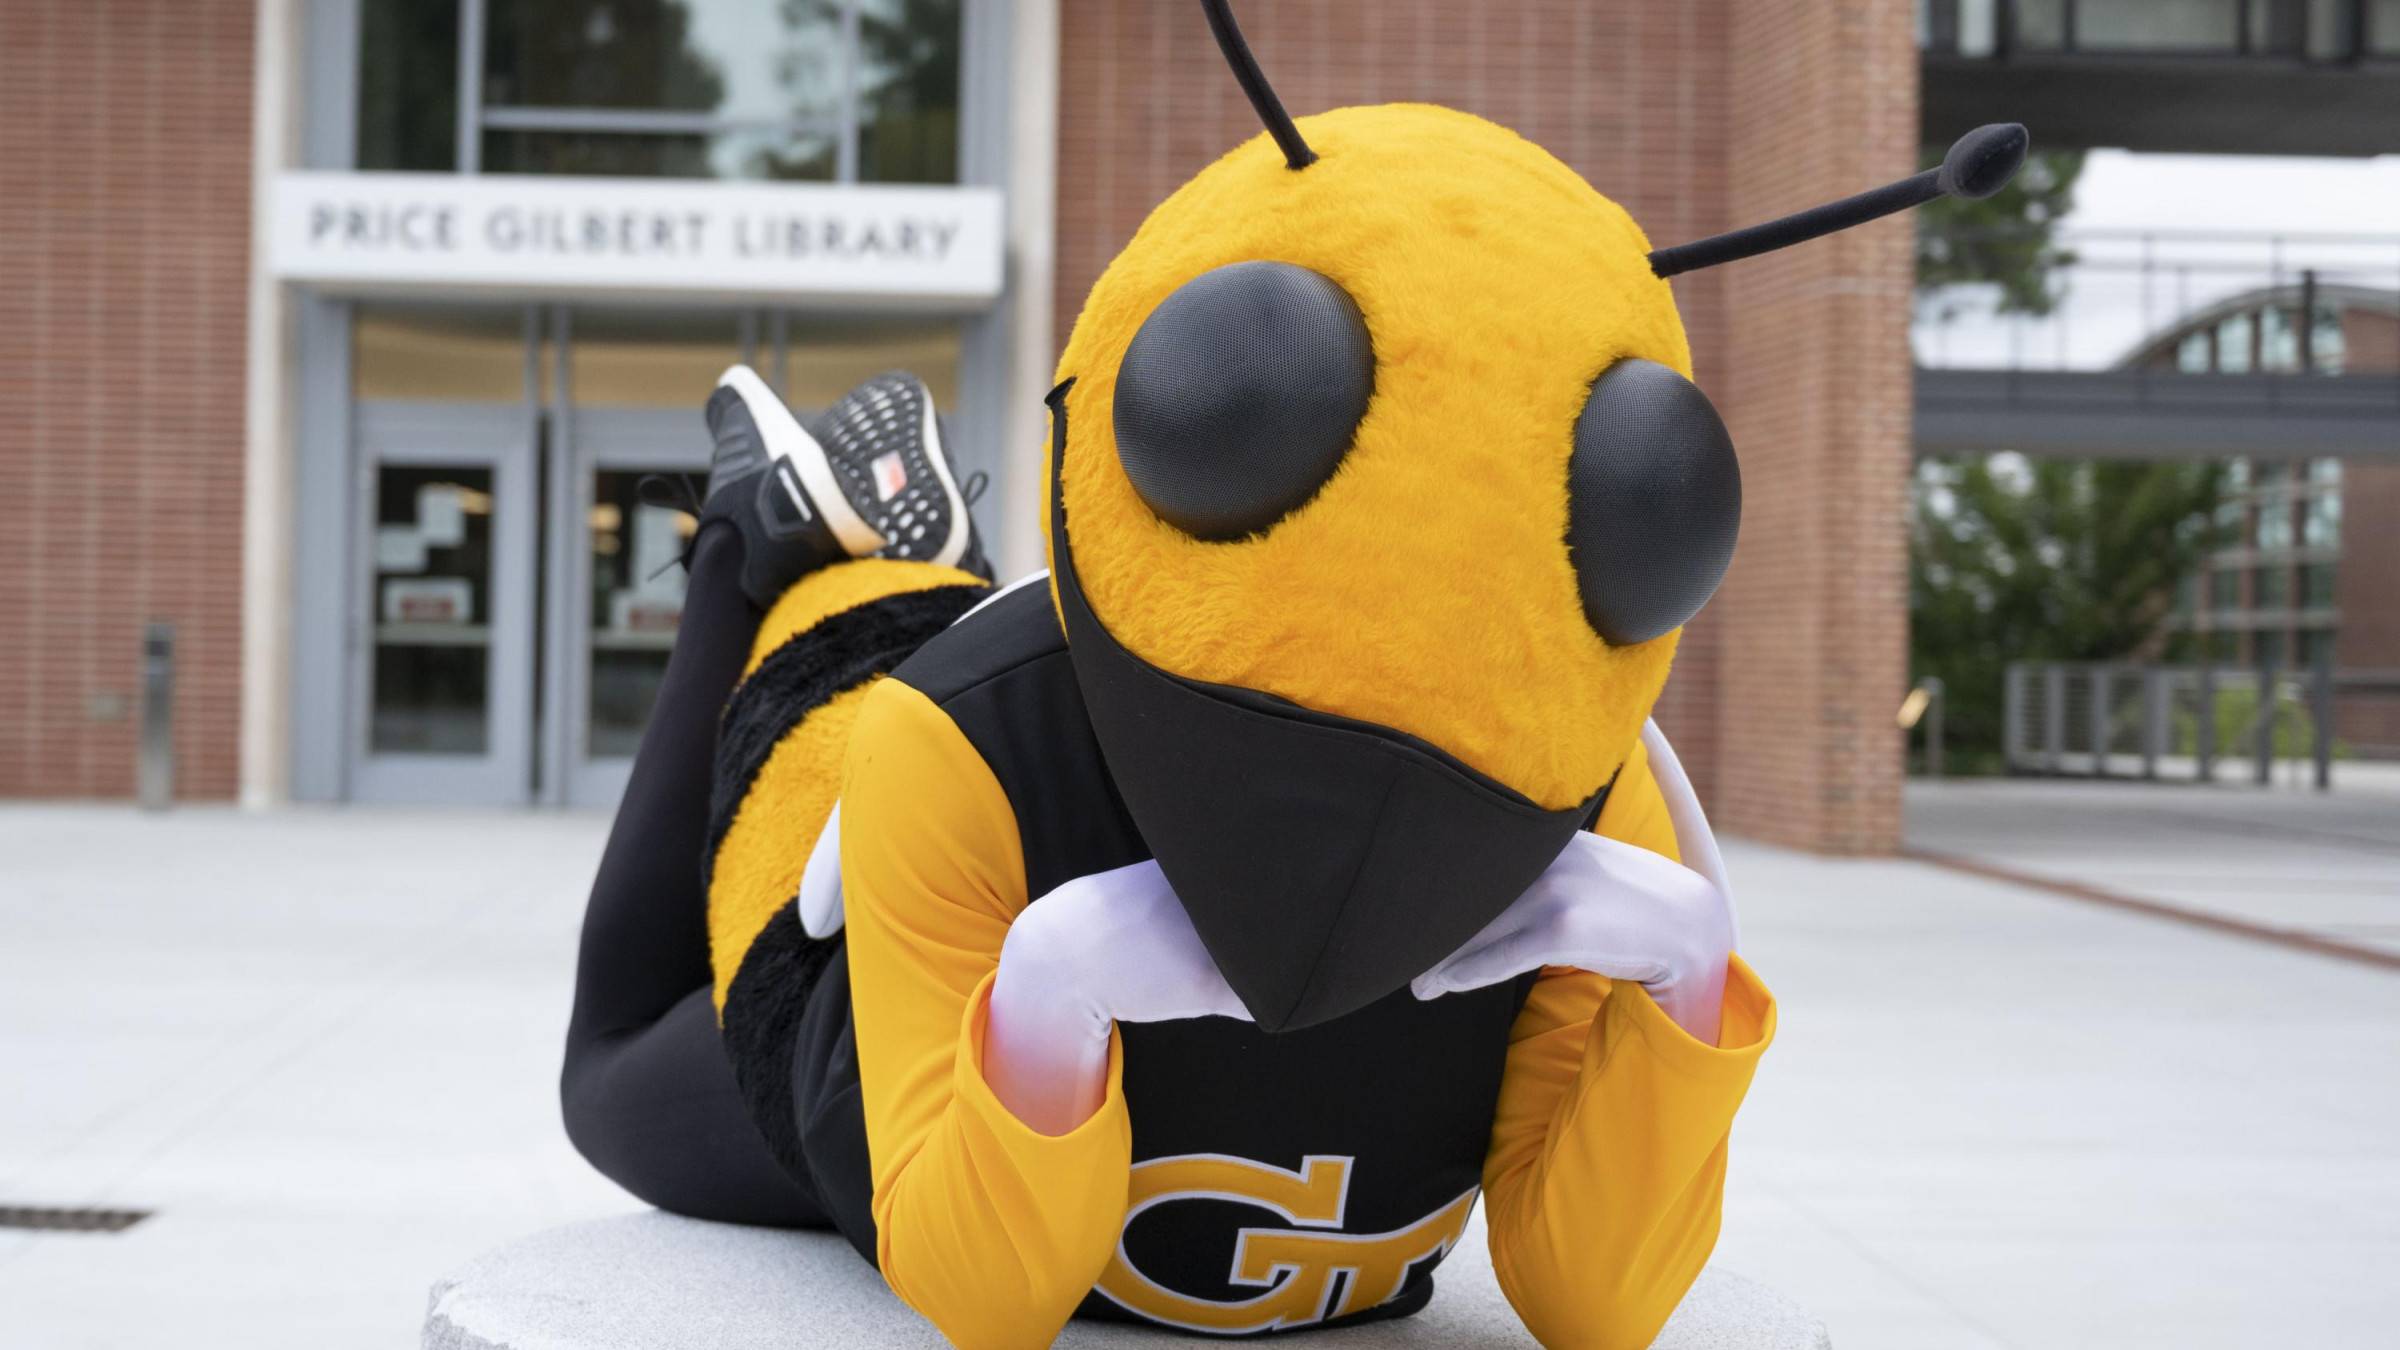 Buzz at Library